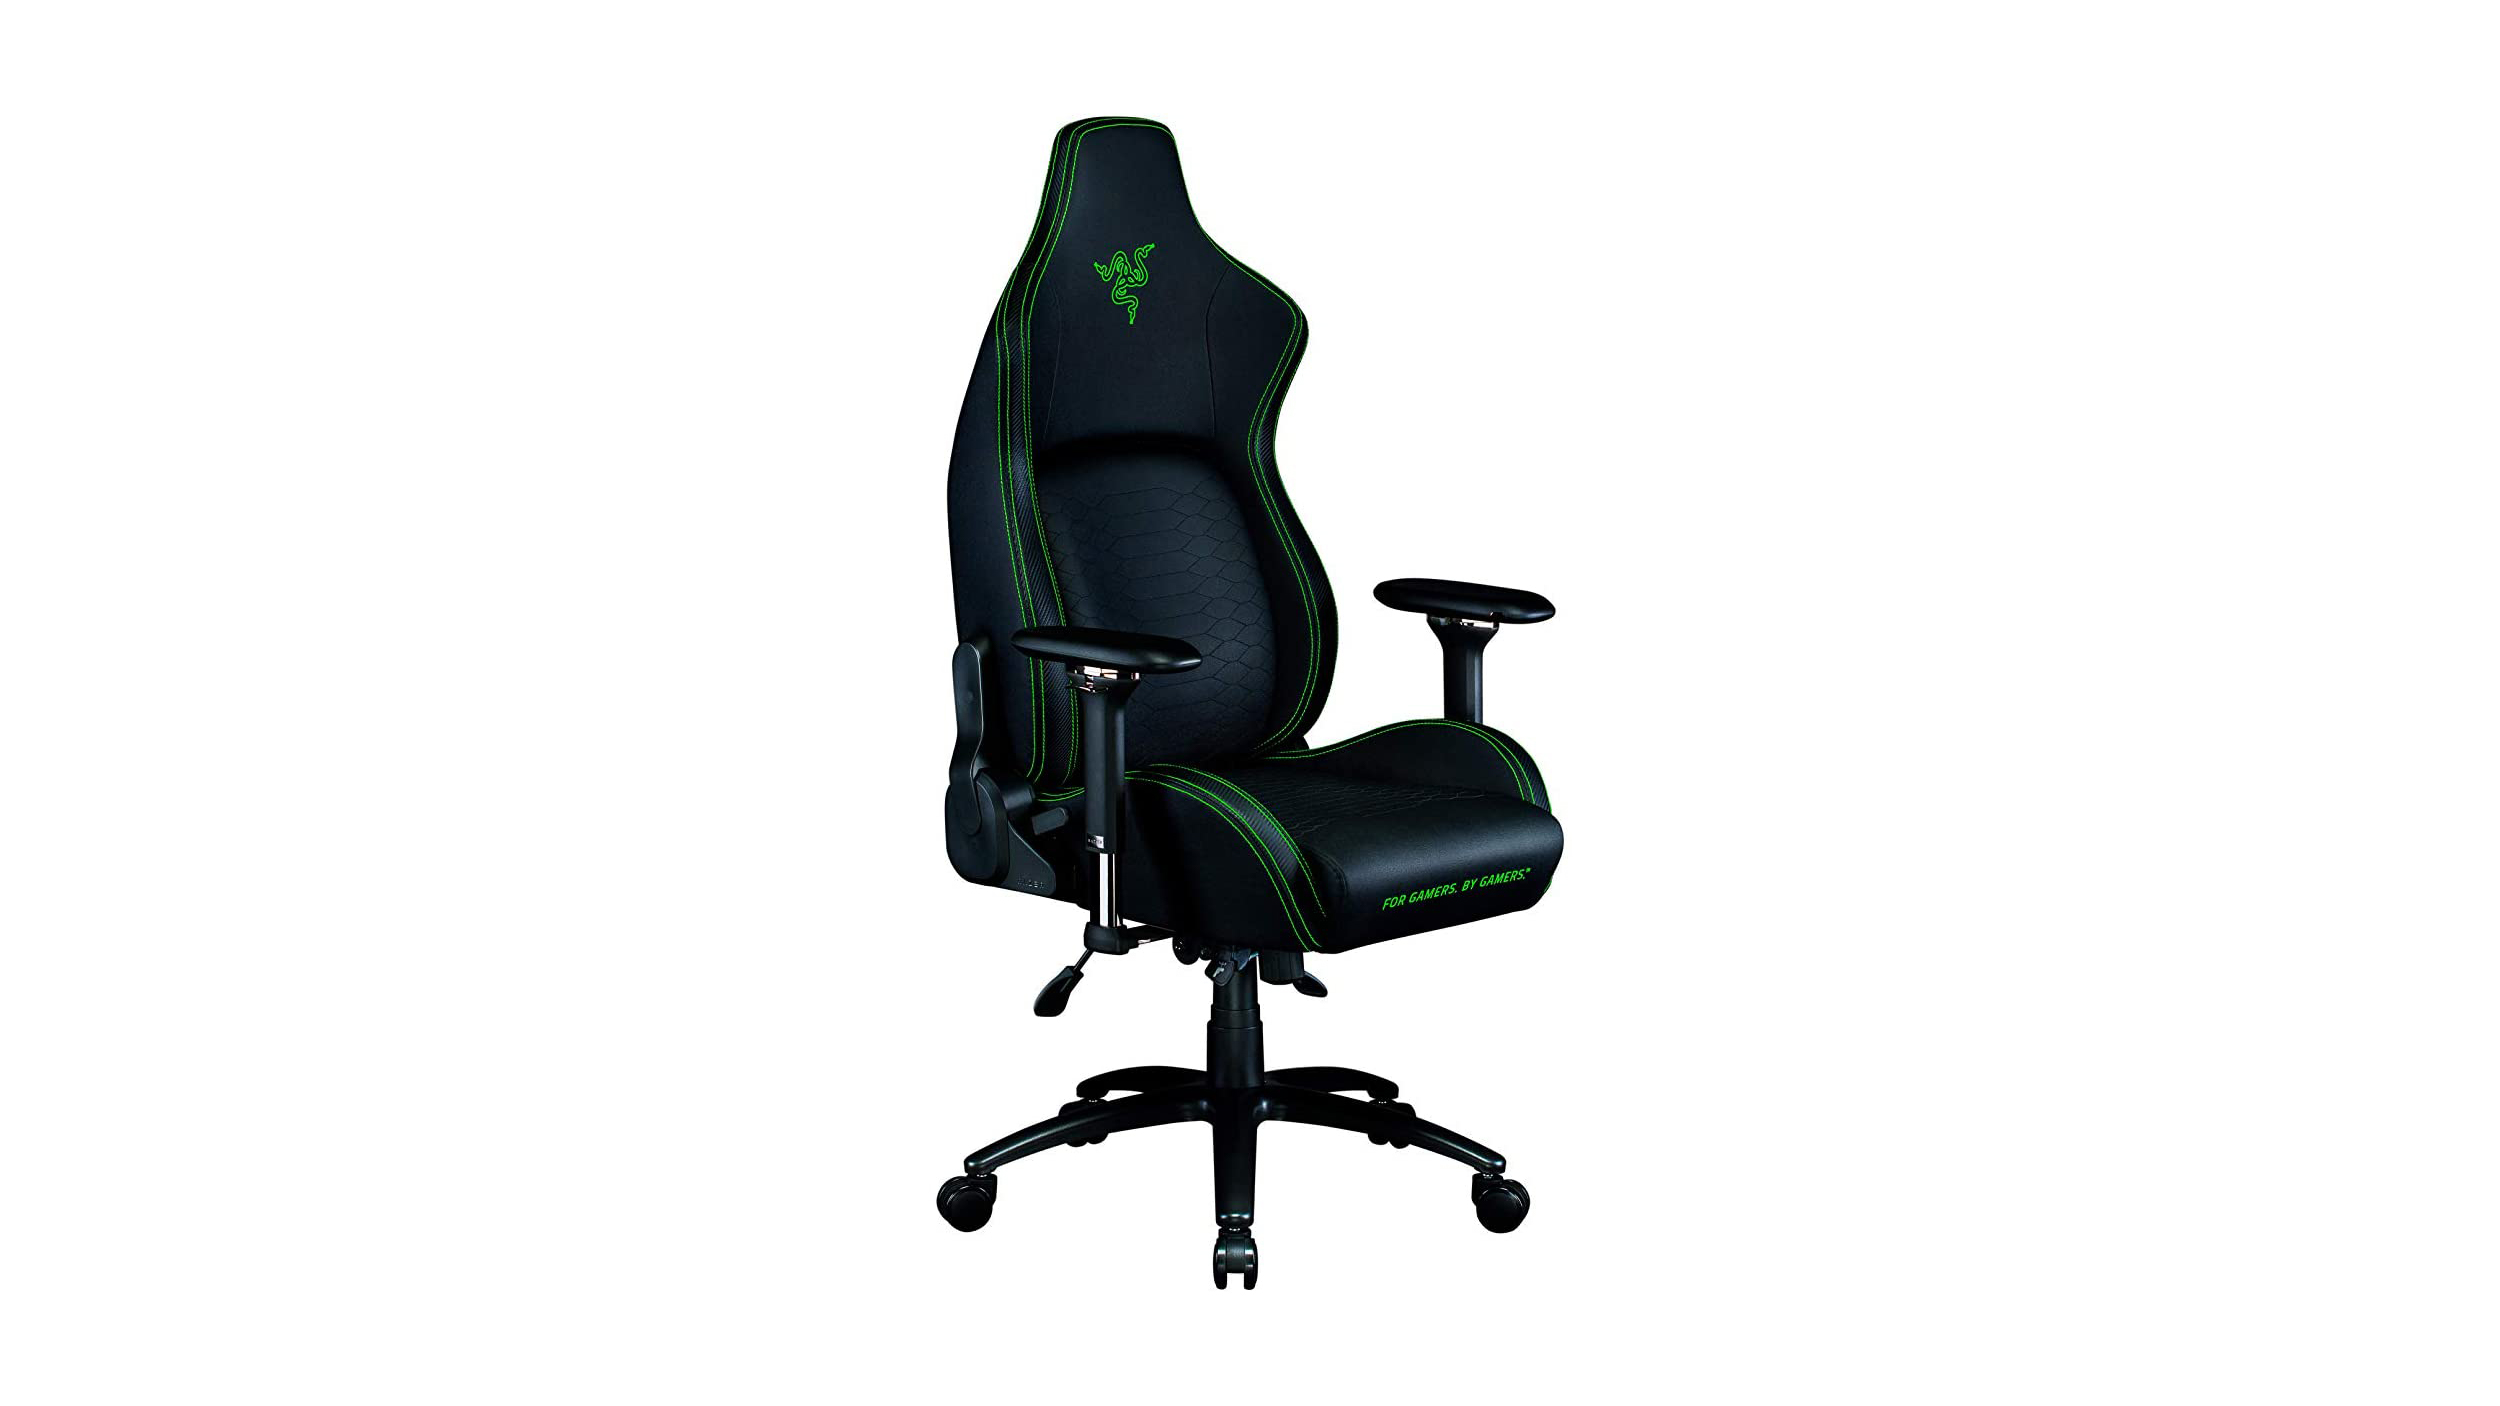 Razer Iskur best gaming chair at an angle on a white background